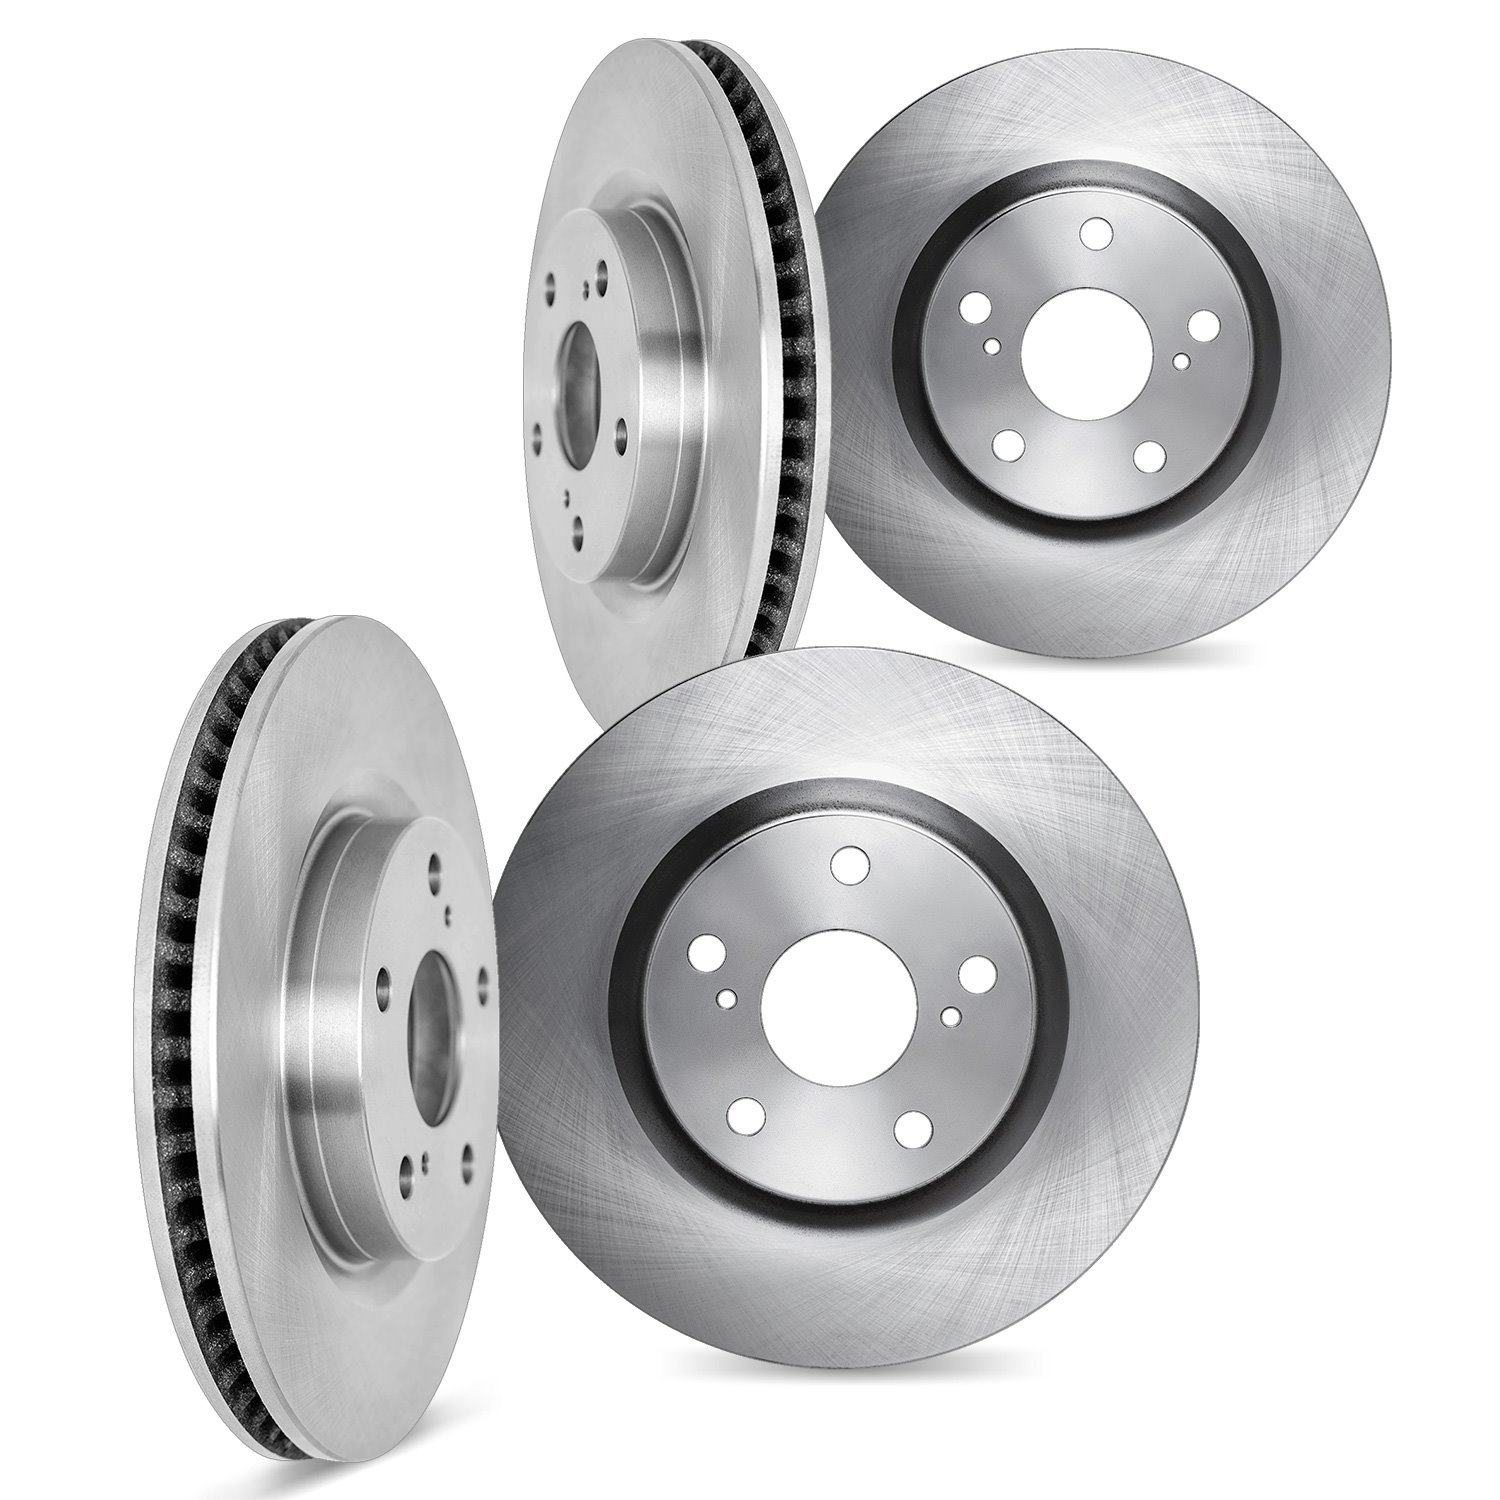 6004-39027 Brake Rotors, Fits Select Mopar, Position: Front and Rear